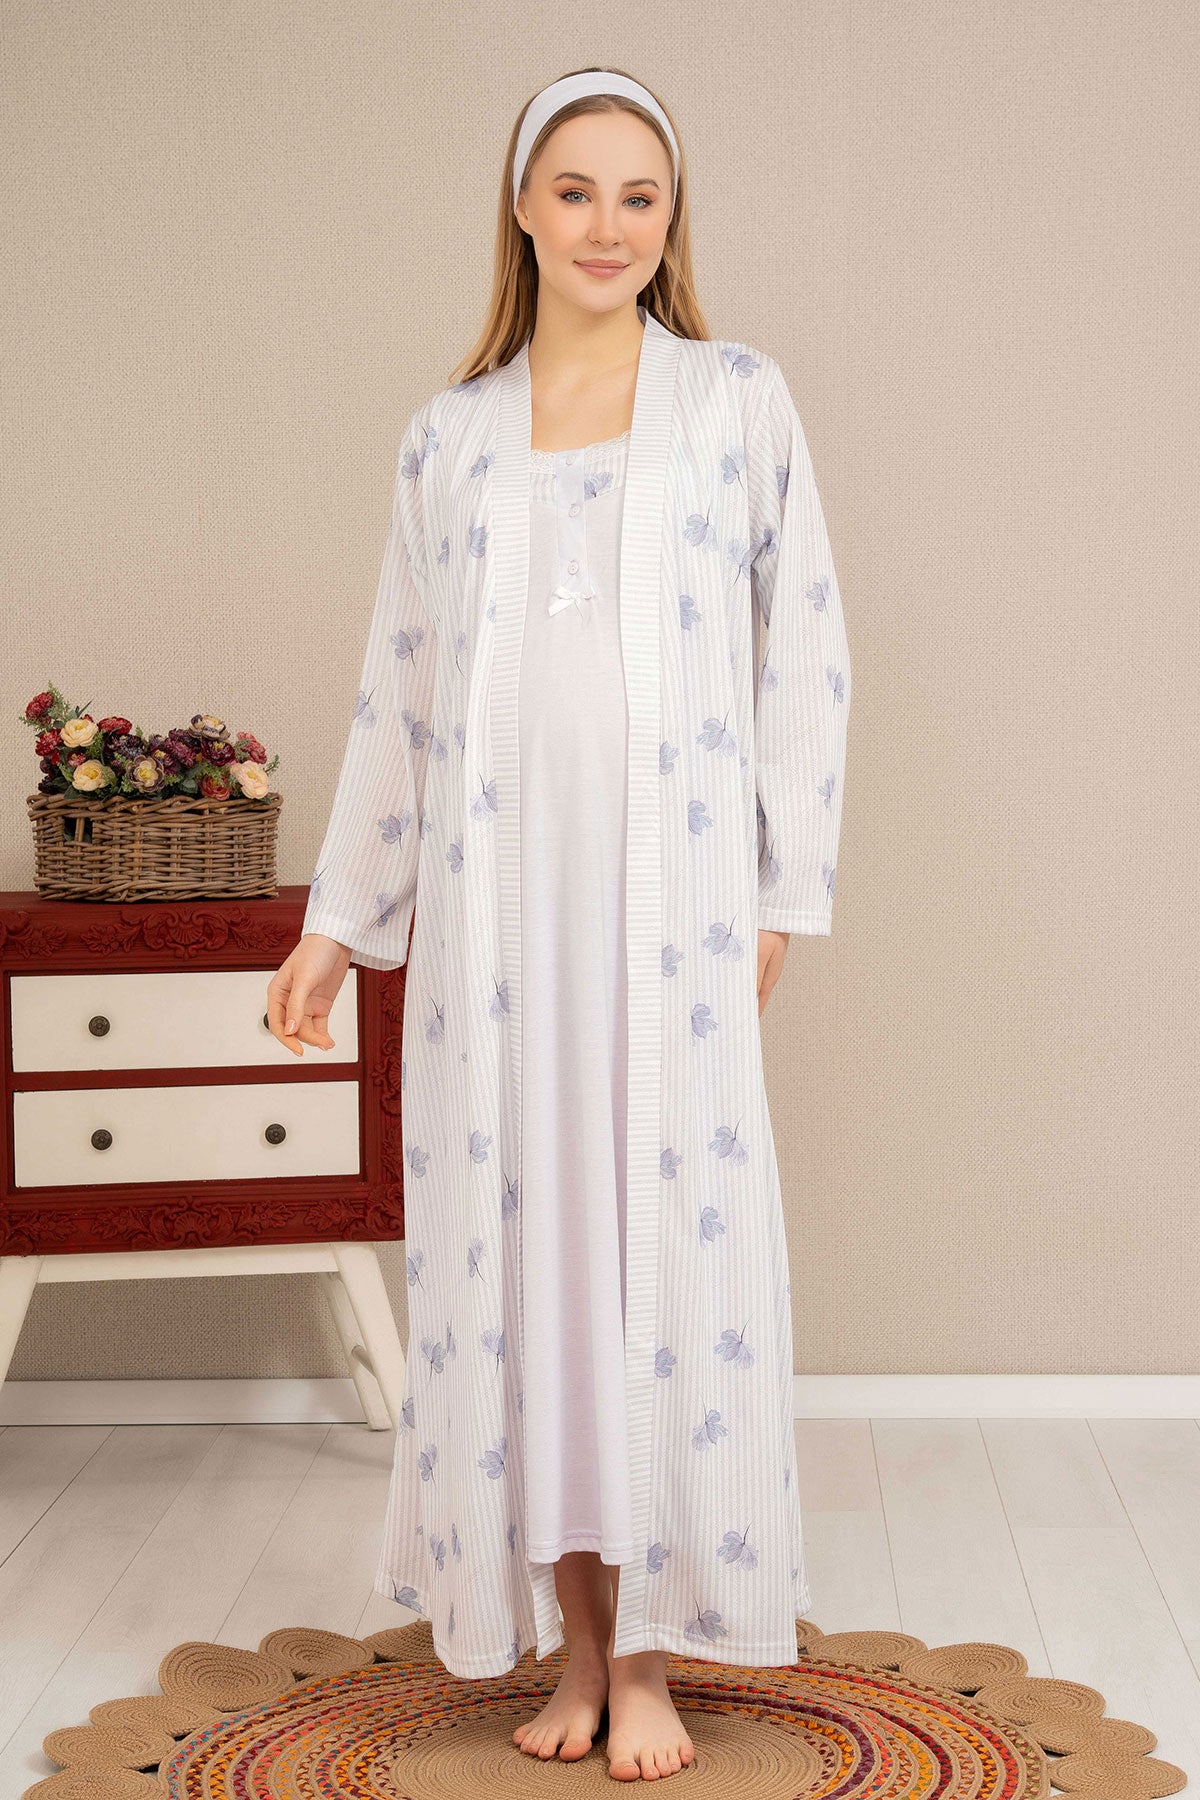 Strap Maternity & Nursing Nightgown With Flower Pattern Robe Lilac - 4522